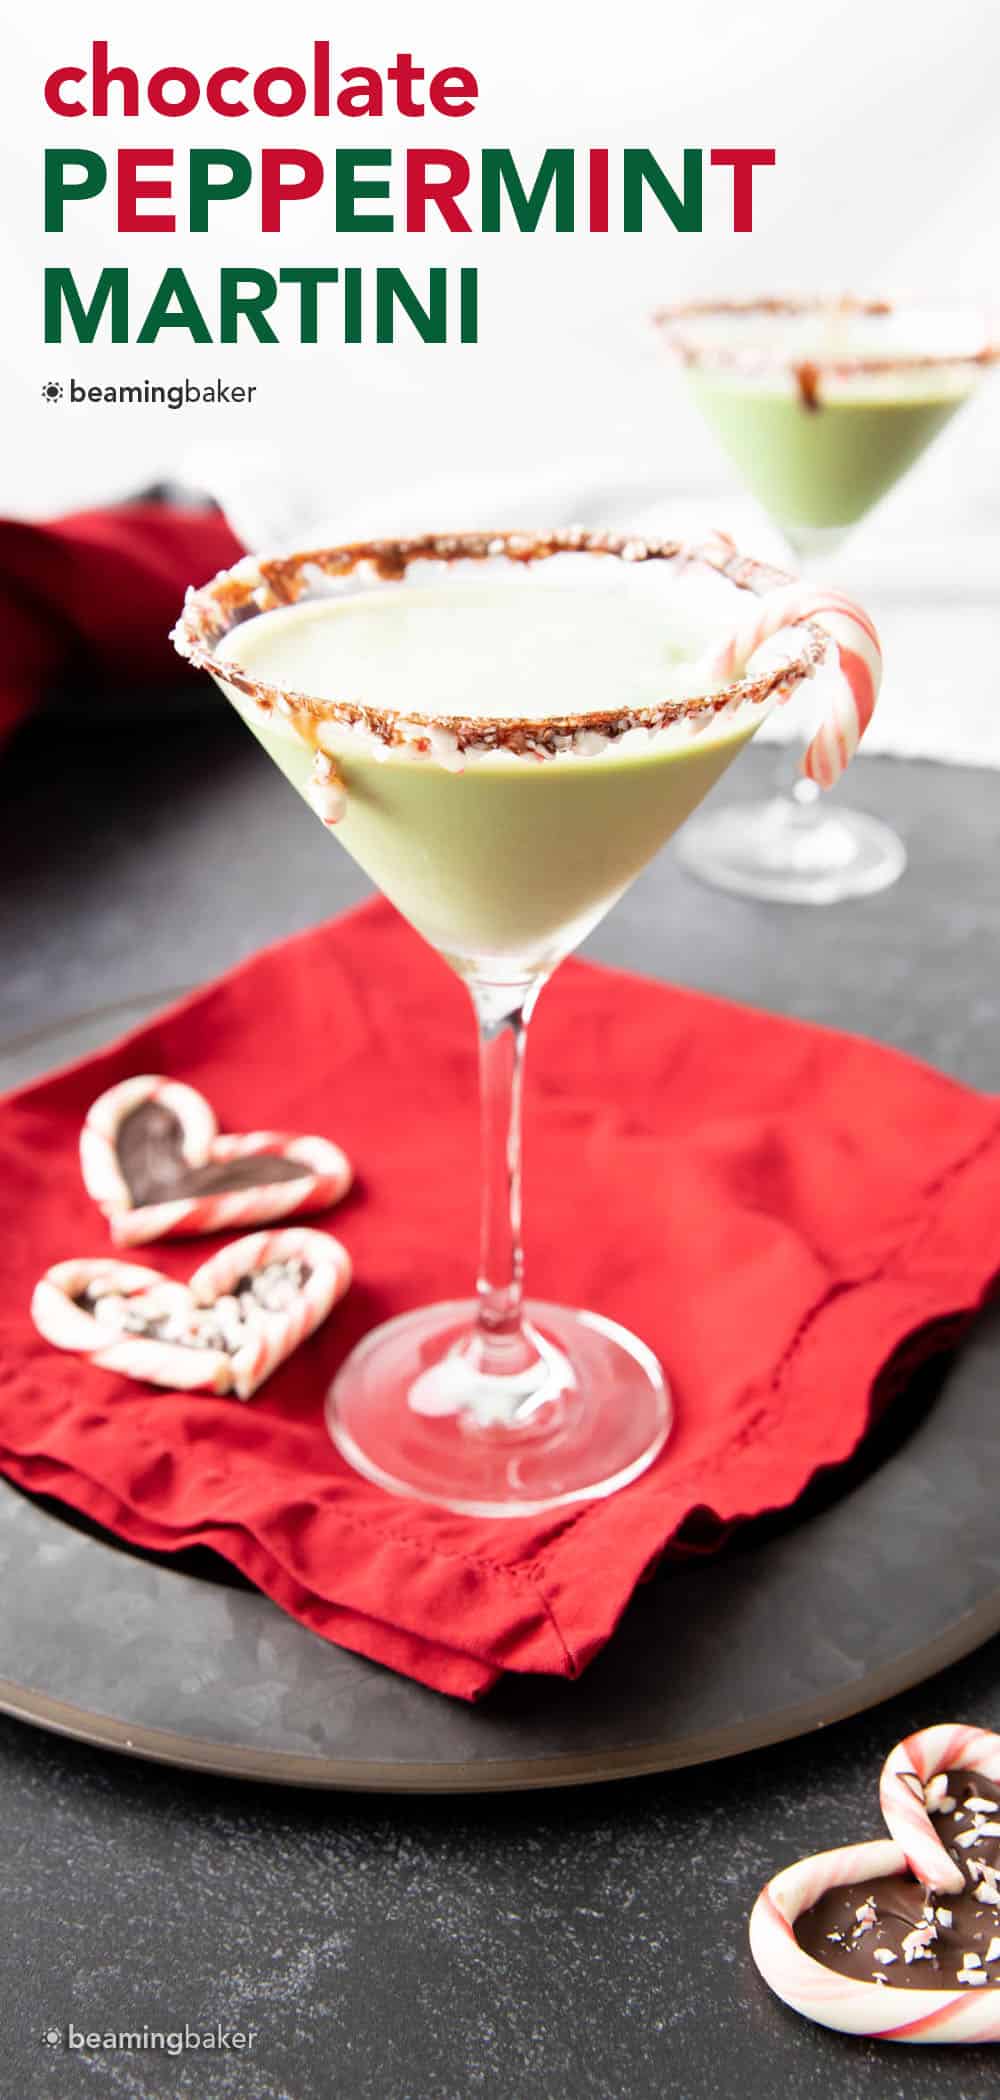 Chocolate Peppermint Martini pin image